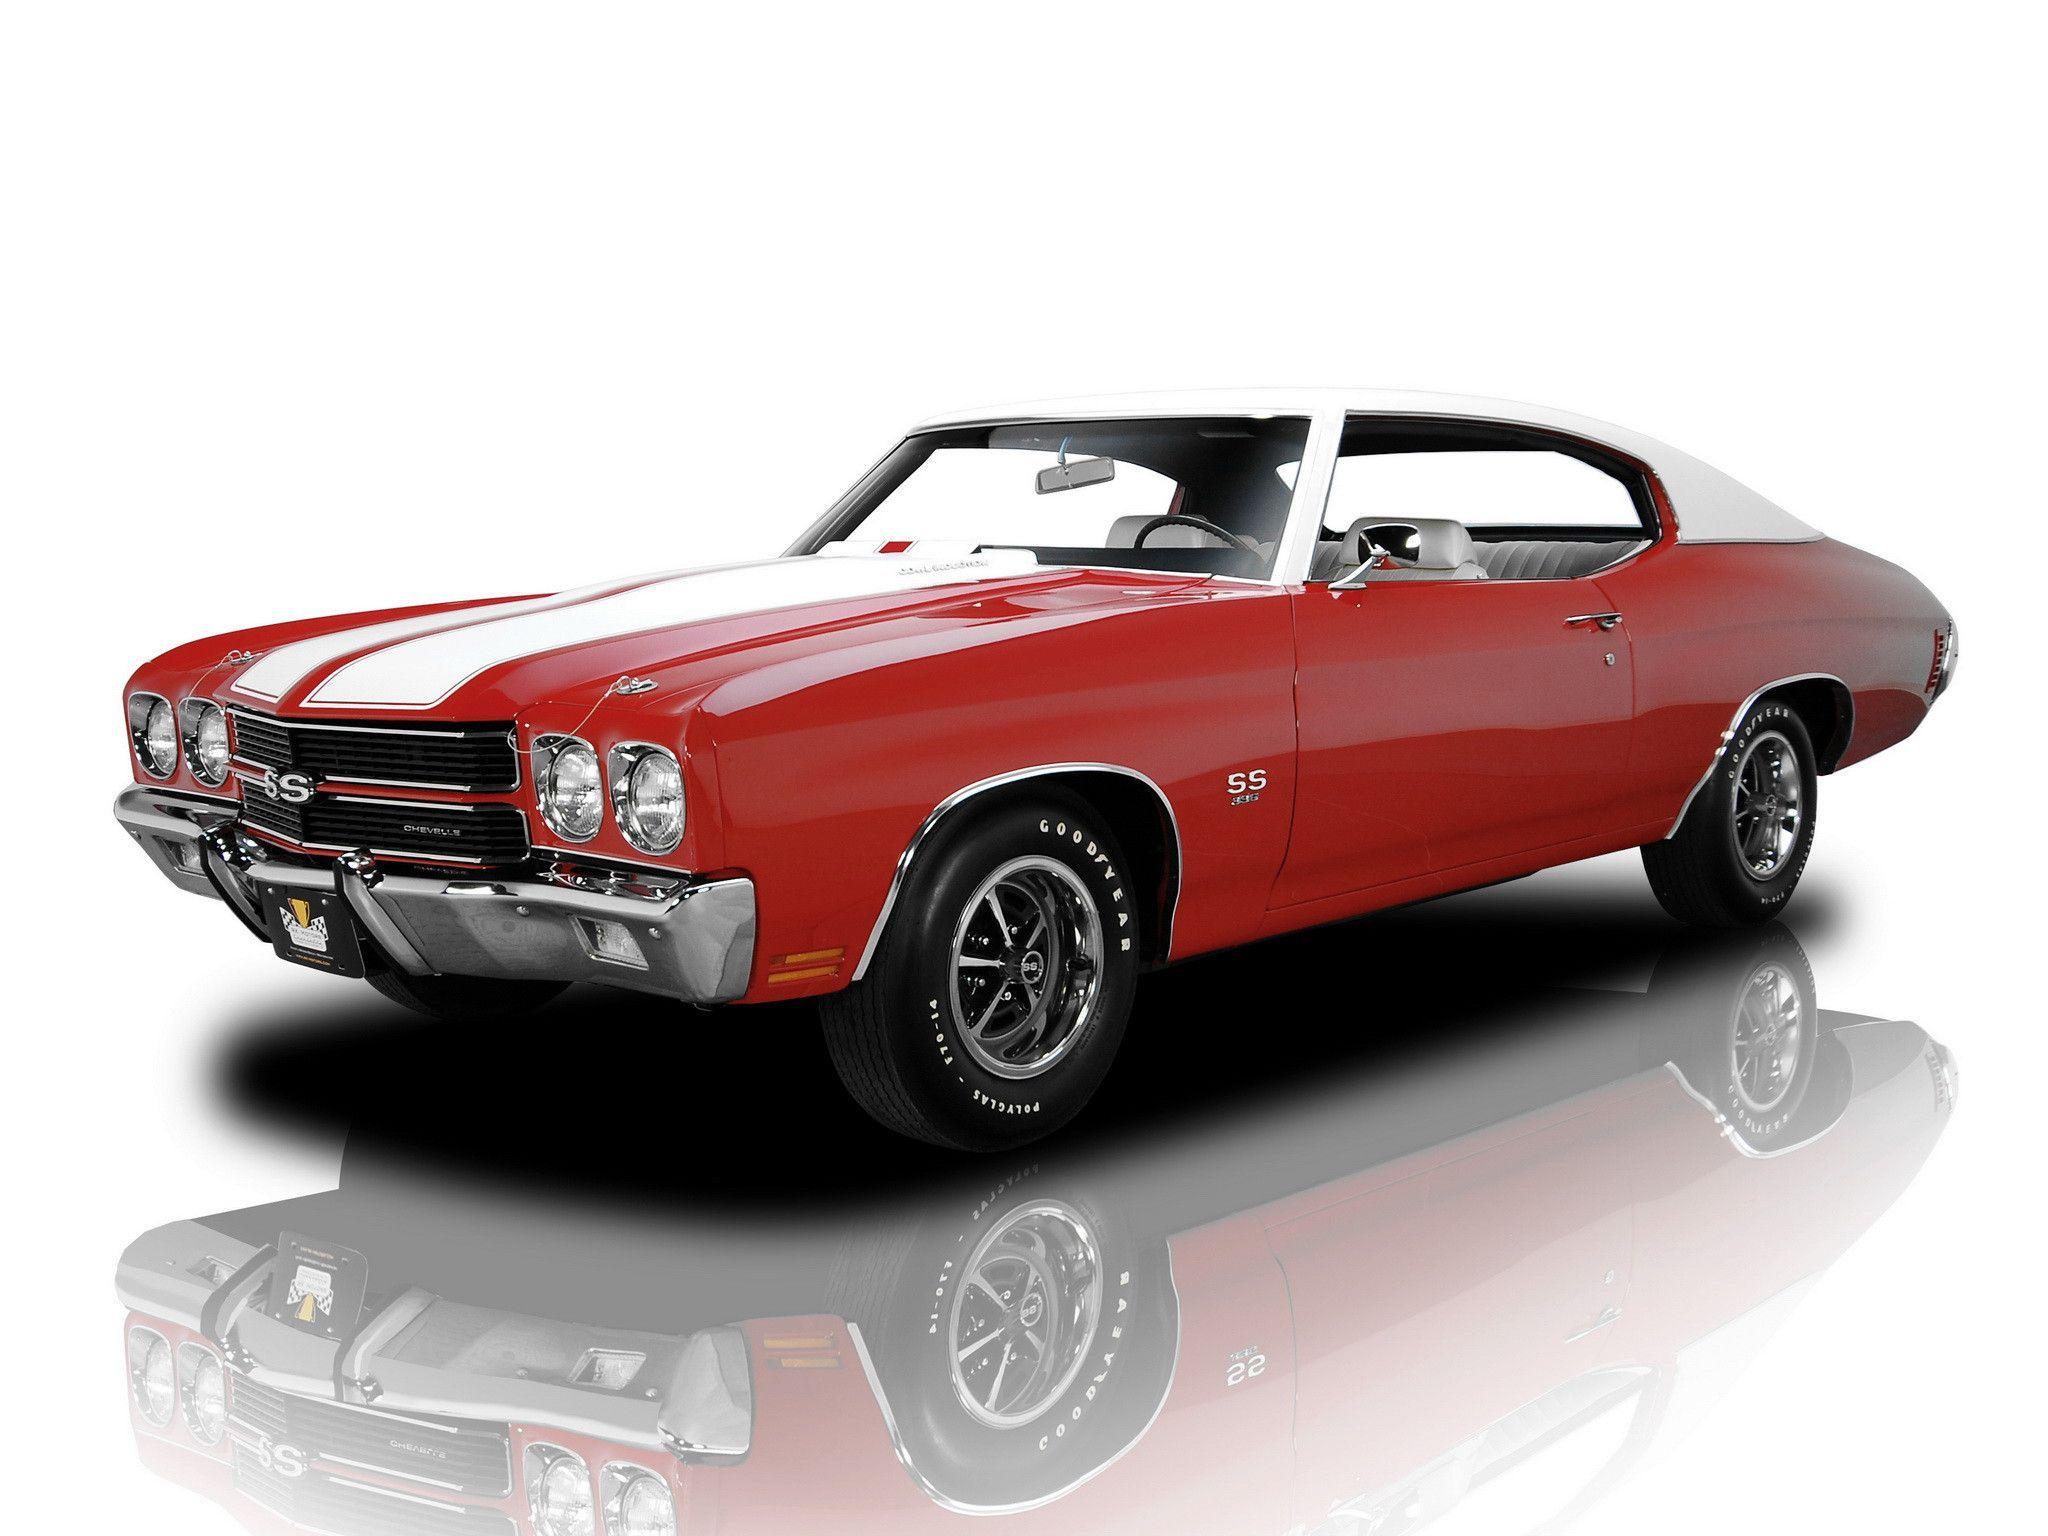 1970 Chevelle SS Wallpapers - Wallpaper Cave